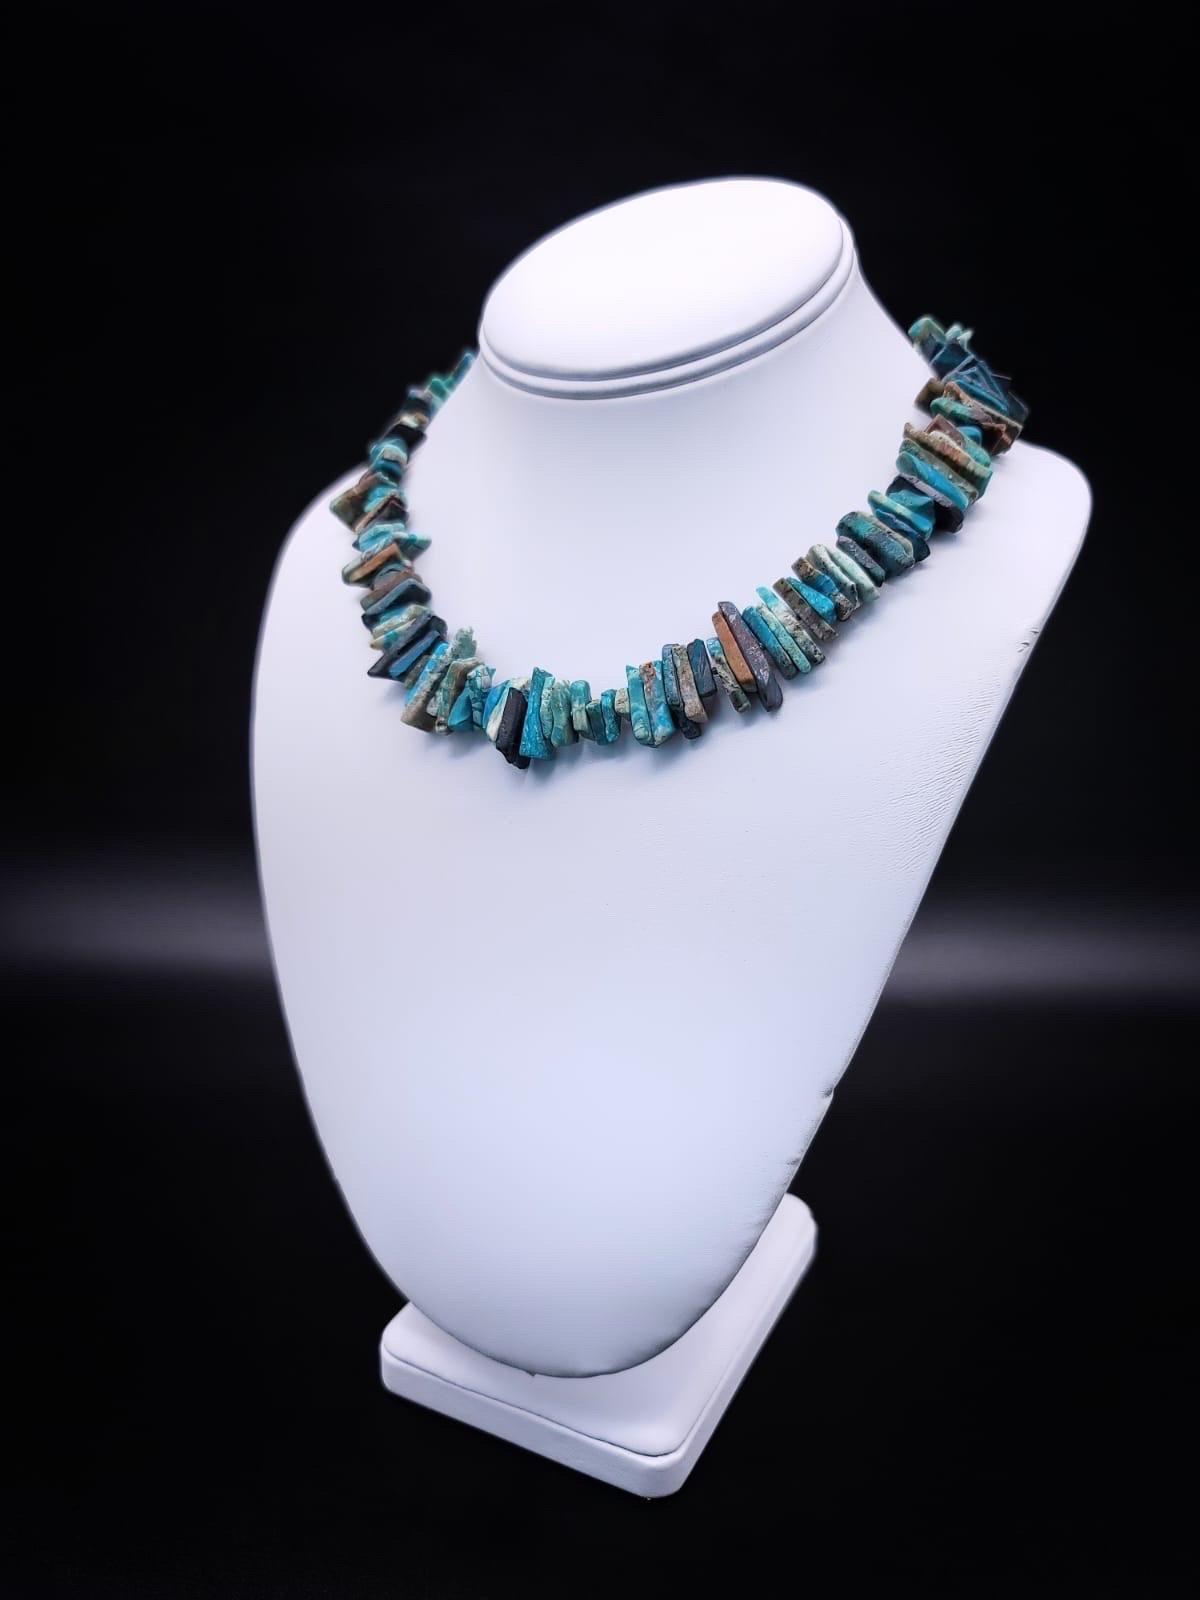 One-of-a-Kind

A Peruvian Blue Opal Shard Necklace. Each opal shard boasts a mesmerizing array of rich colors, ranging from deep ocean blues to vibrant greens and occasional hints of caramel captivating the diverse colors of Peru’s landscapes. The